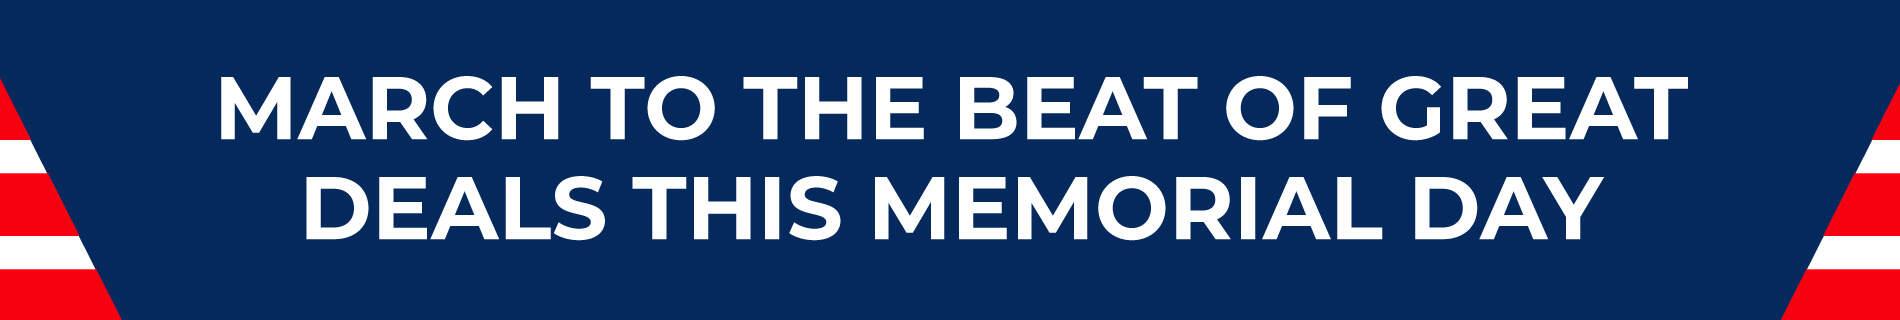 March to the beat of great deals this memorial day!